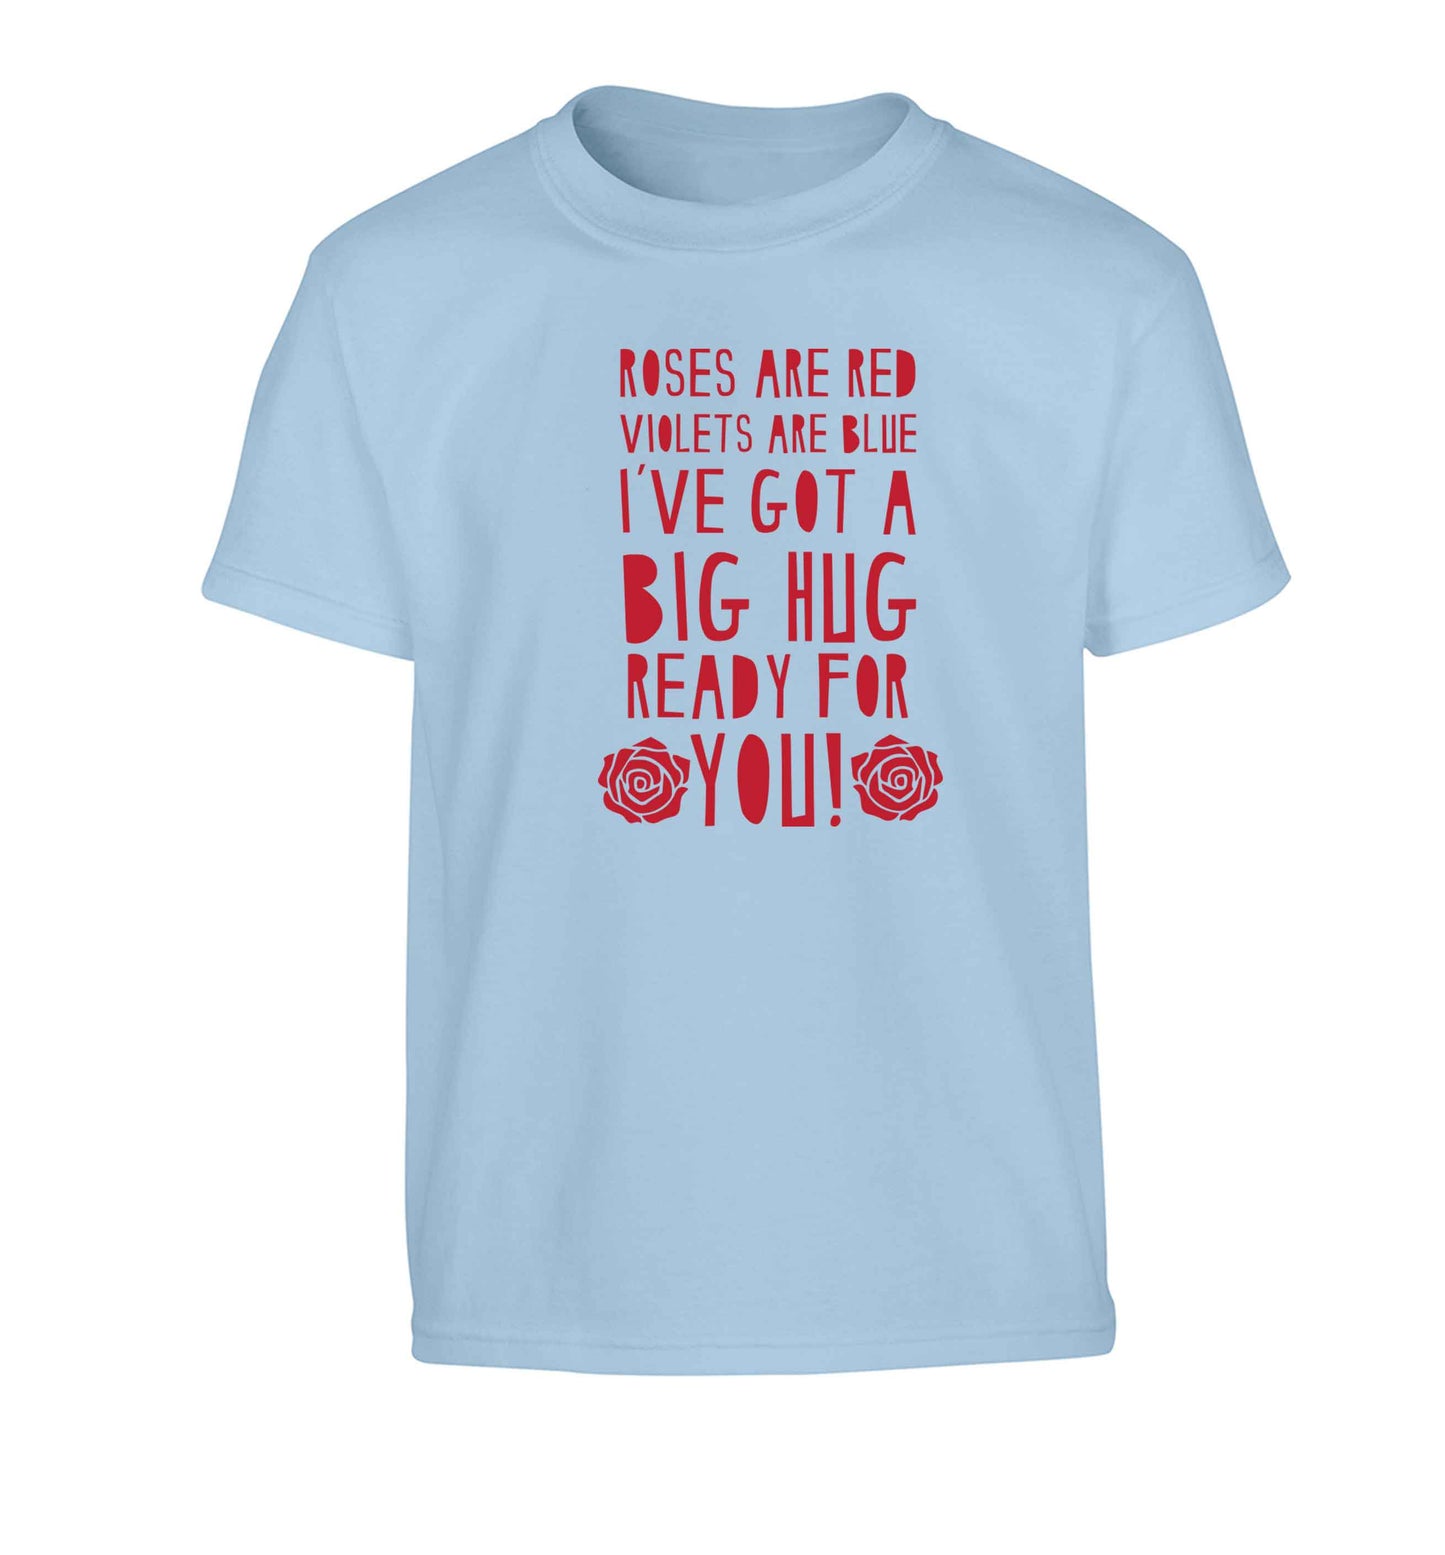 Roses are red violets are blue I've got a big hug coming for you Children's light blue Tshirt 12-13 Years